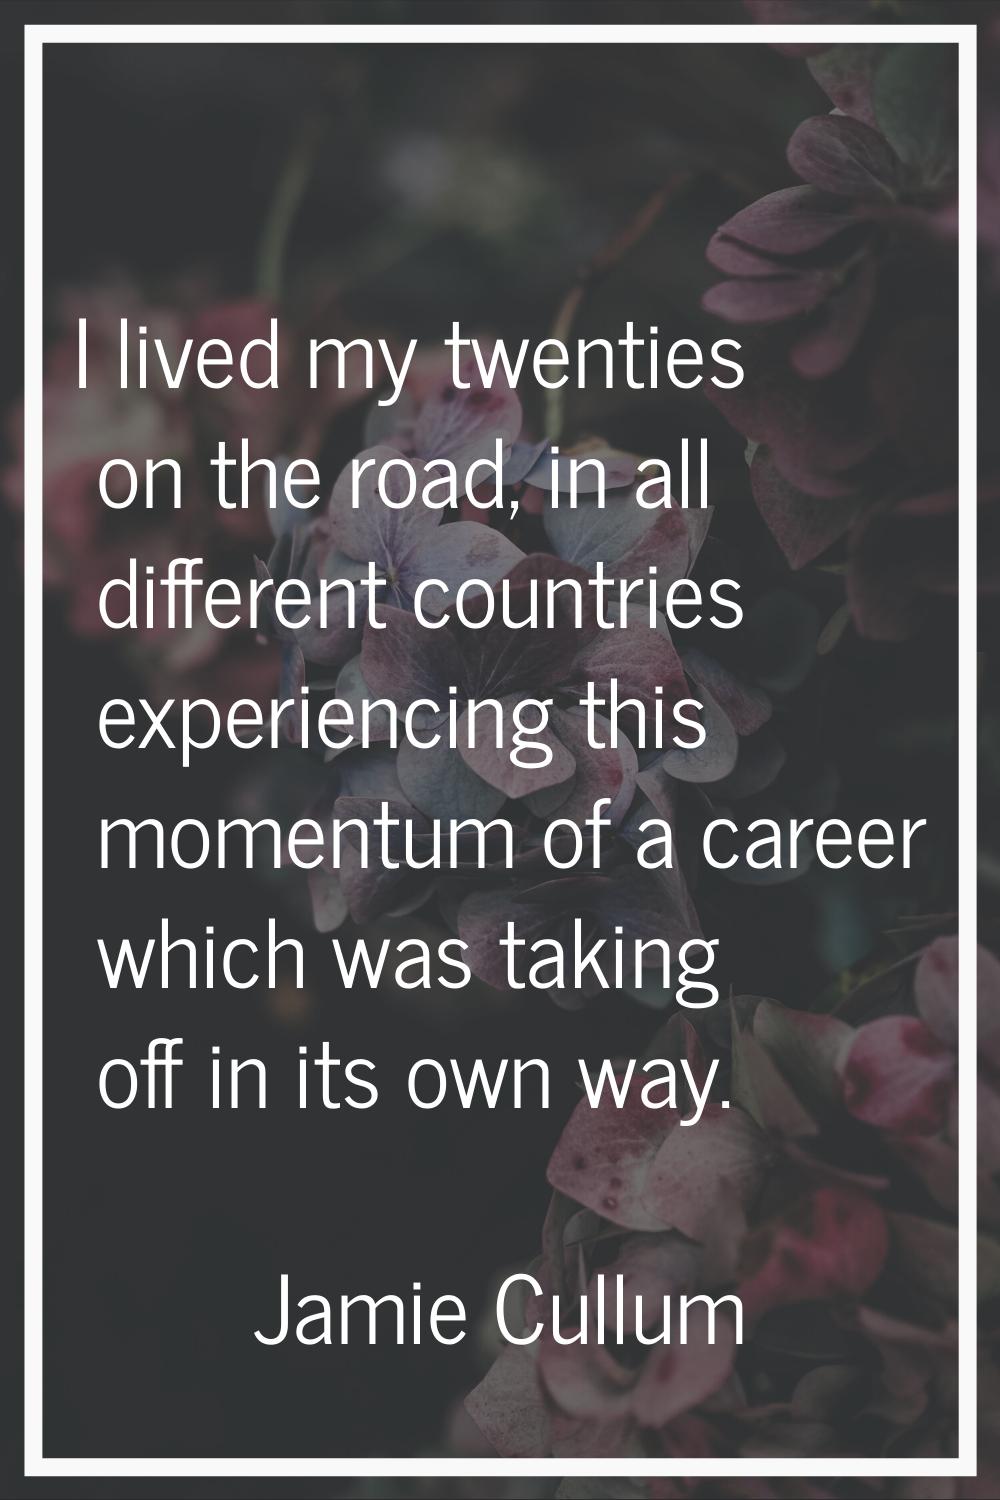 I lived my twenties on the road, in all different countries experiencing this momentum of a career 